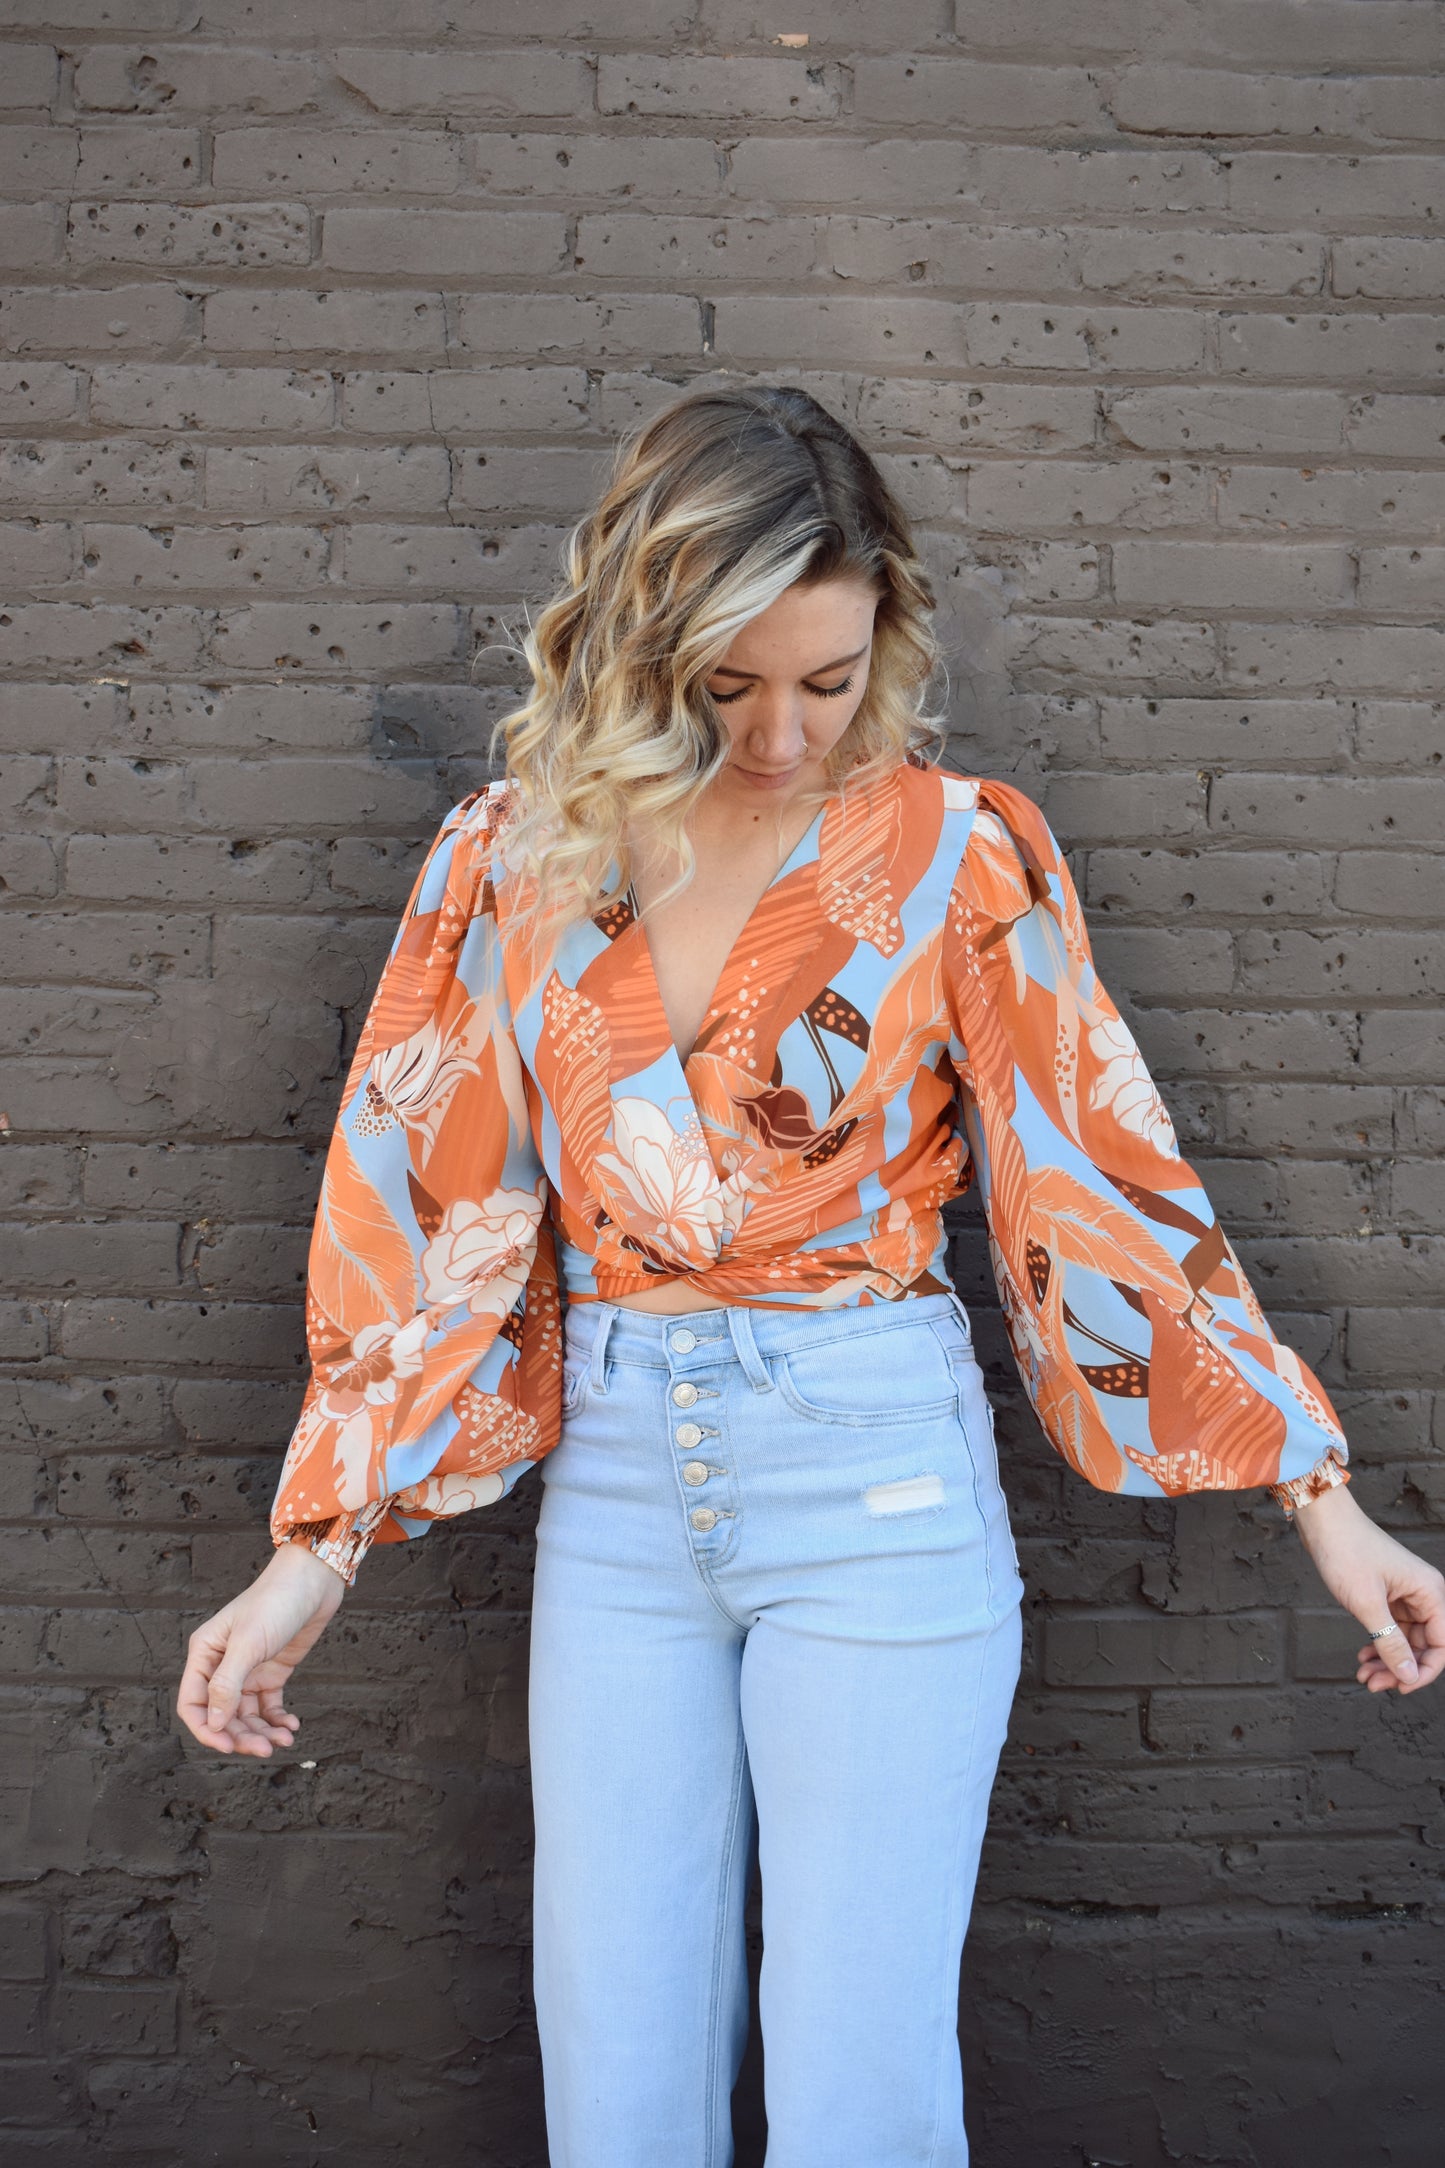 light blue and shades of orange printed lightweight long sleeve v neck line top with twist detail in front and smocked cuffs with balloon sleeves. smocked back waistband.